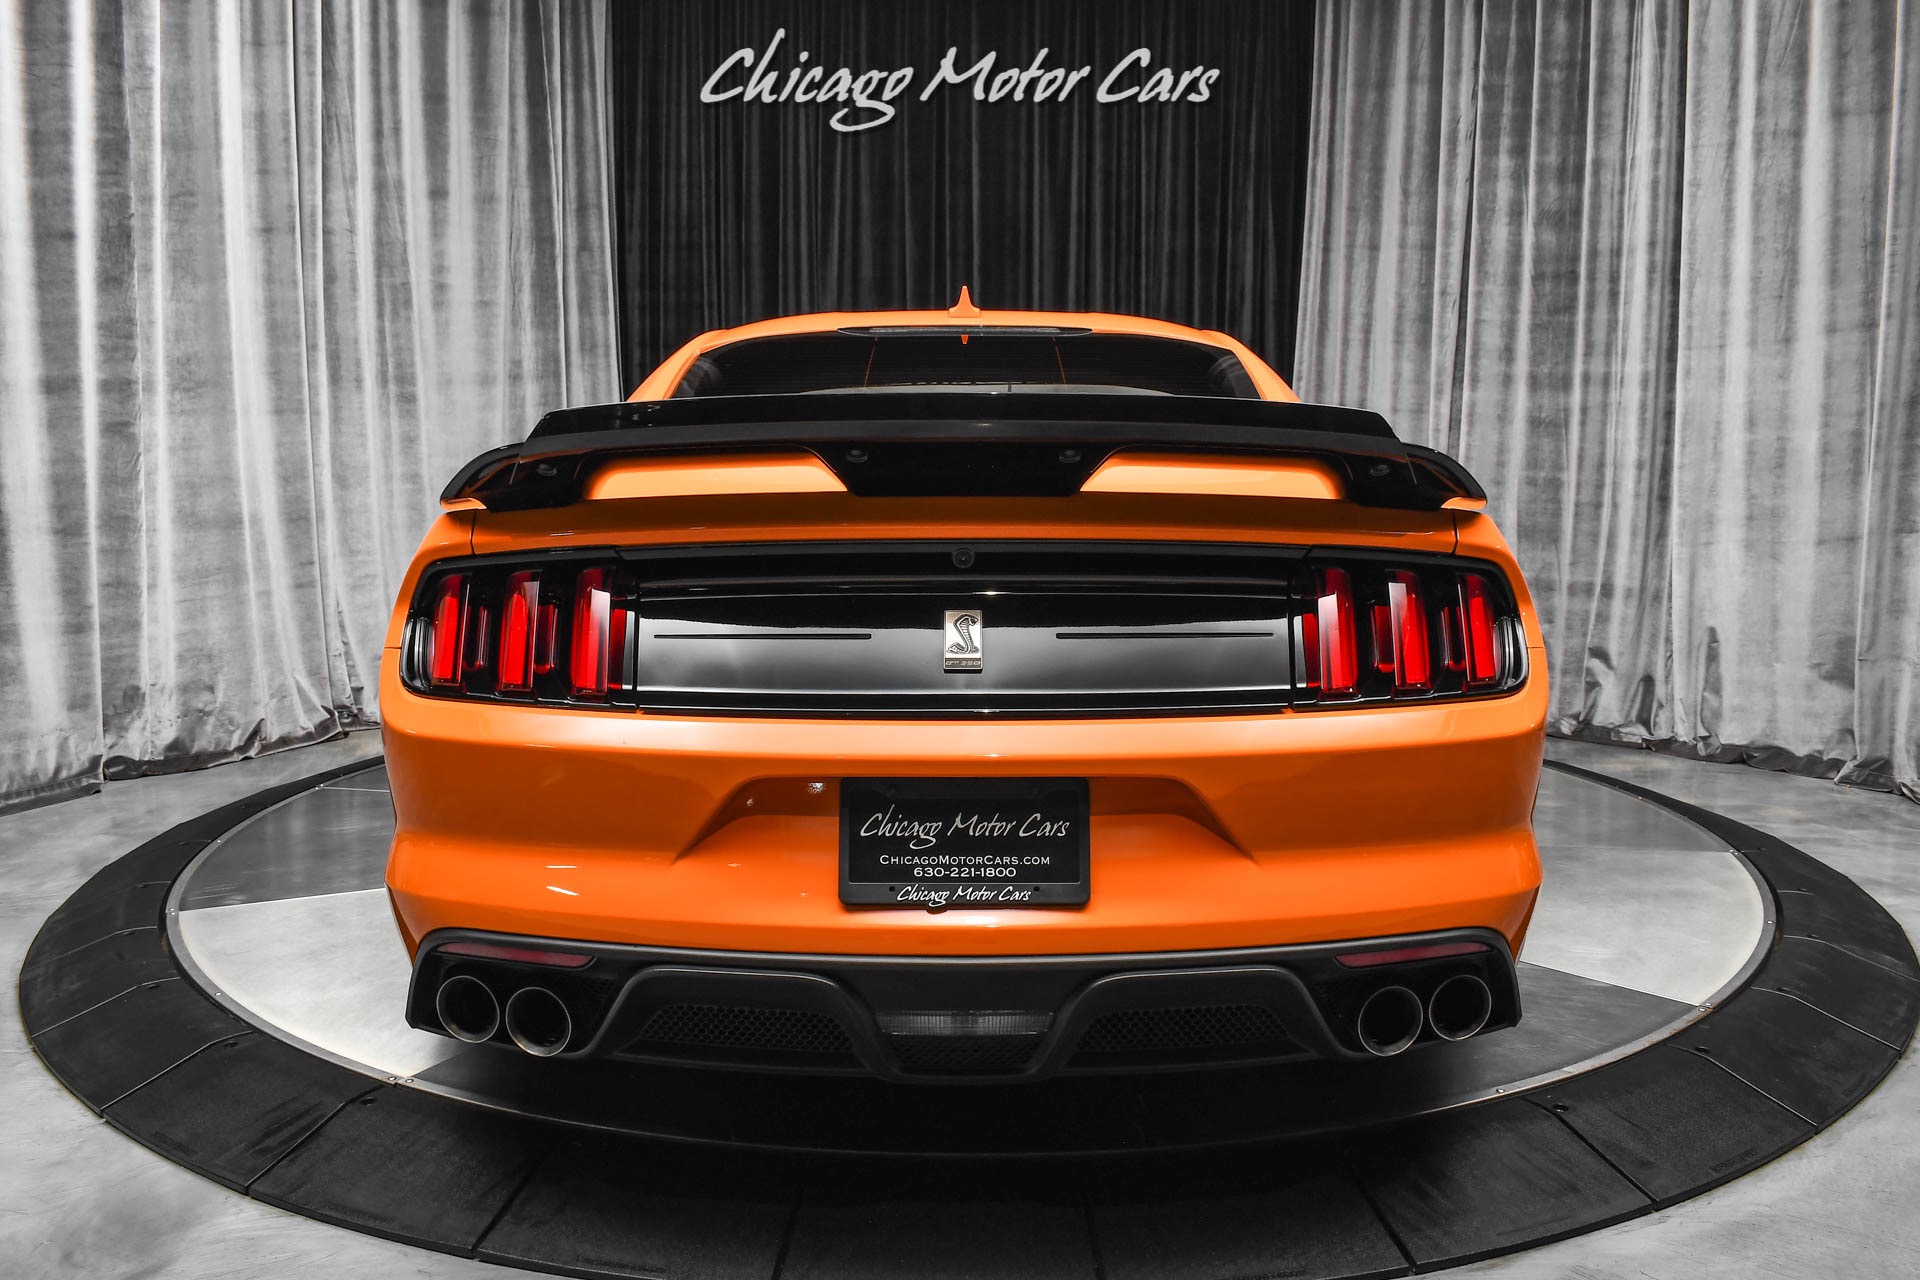 Used-2020-Ford-Mustang-Shelby-GT350-Coupe-Twister-Orange-6-Speed-Manual-Tech-Pack-ONLY-3K-Miles